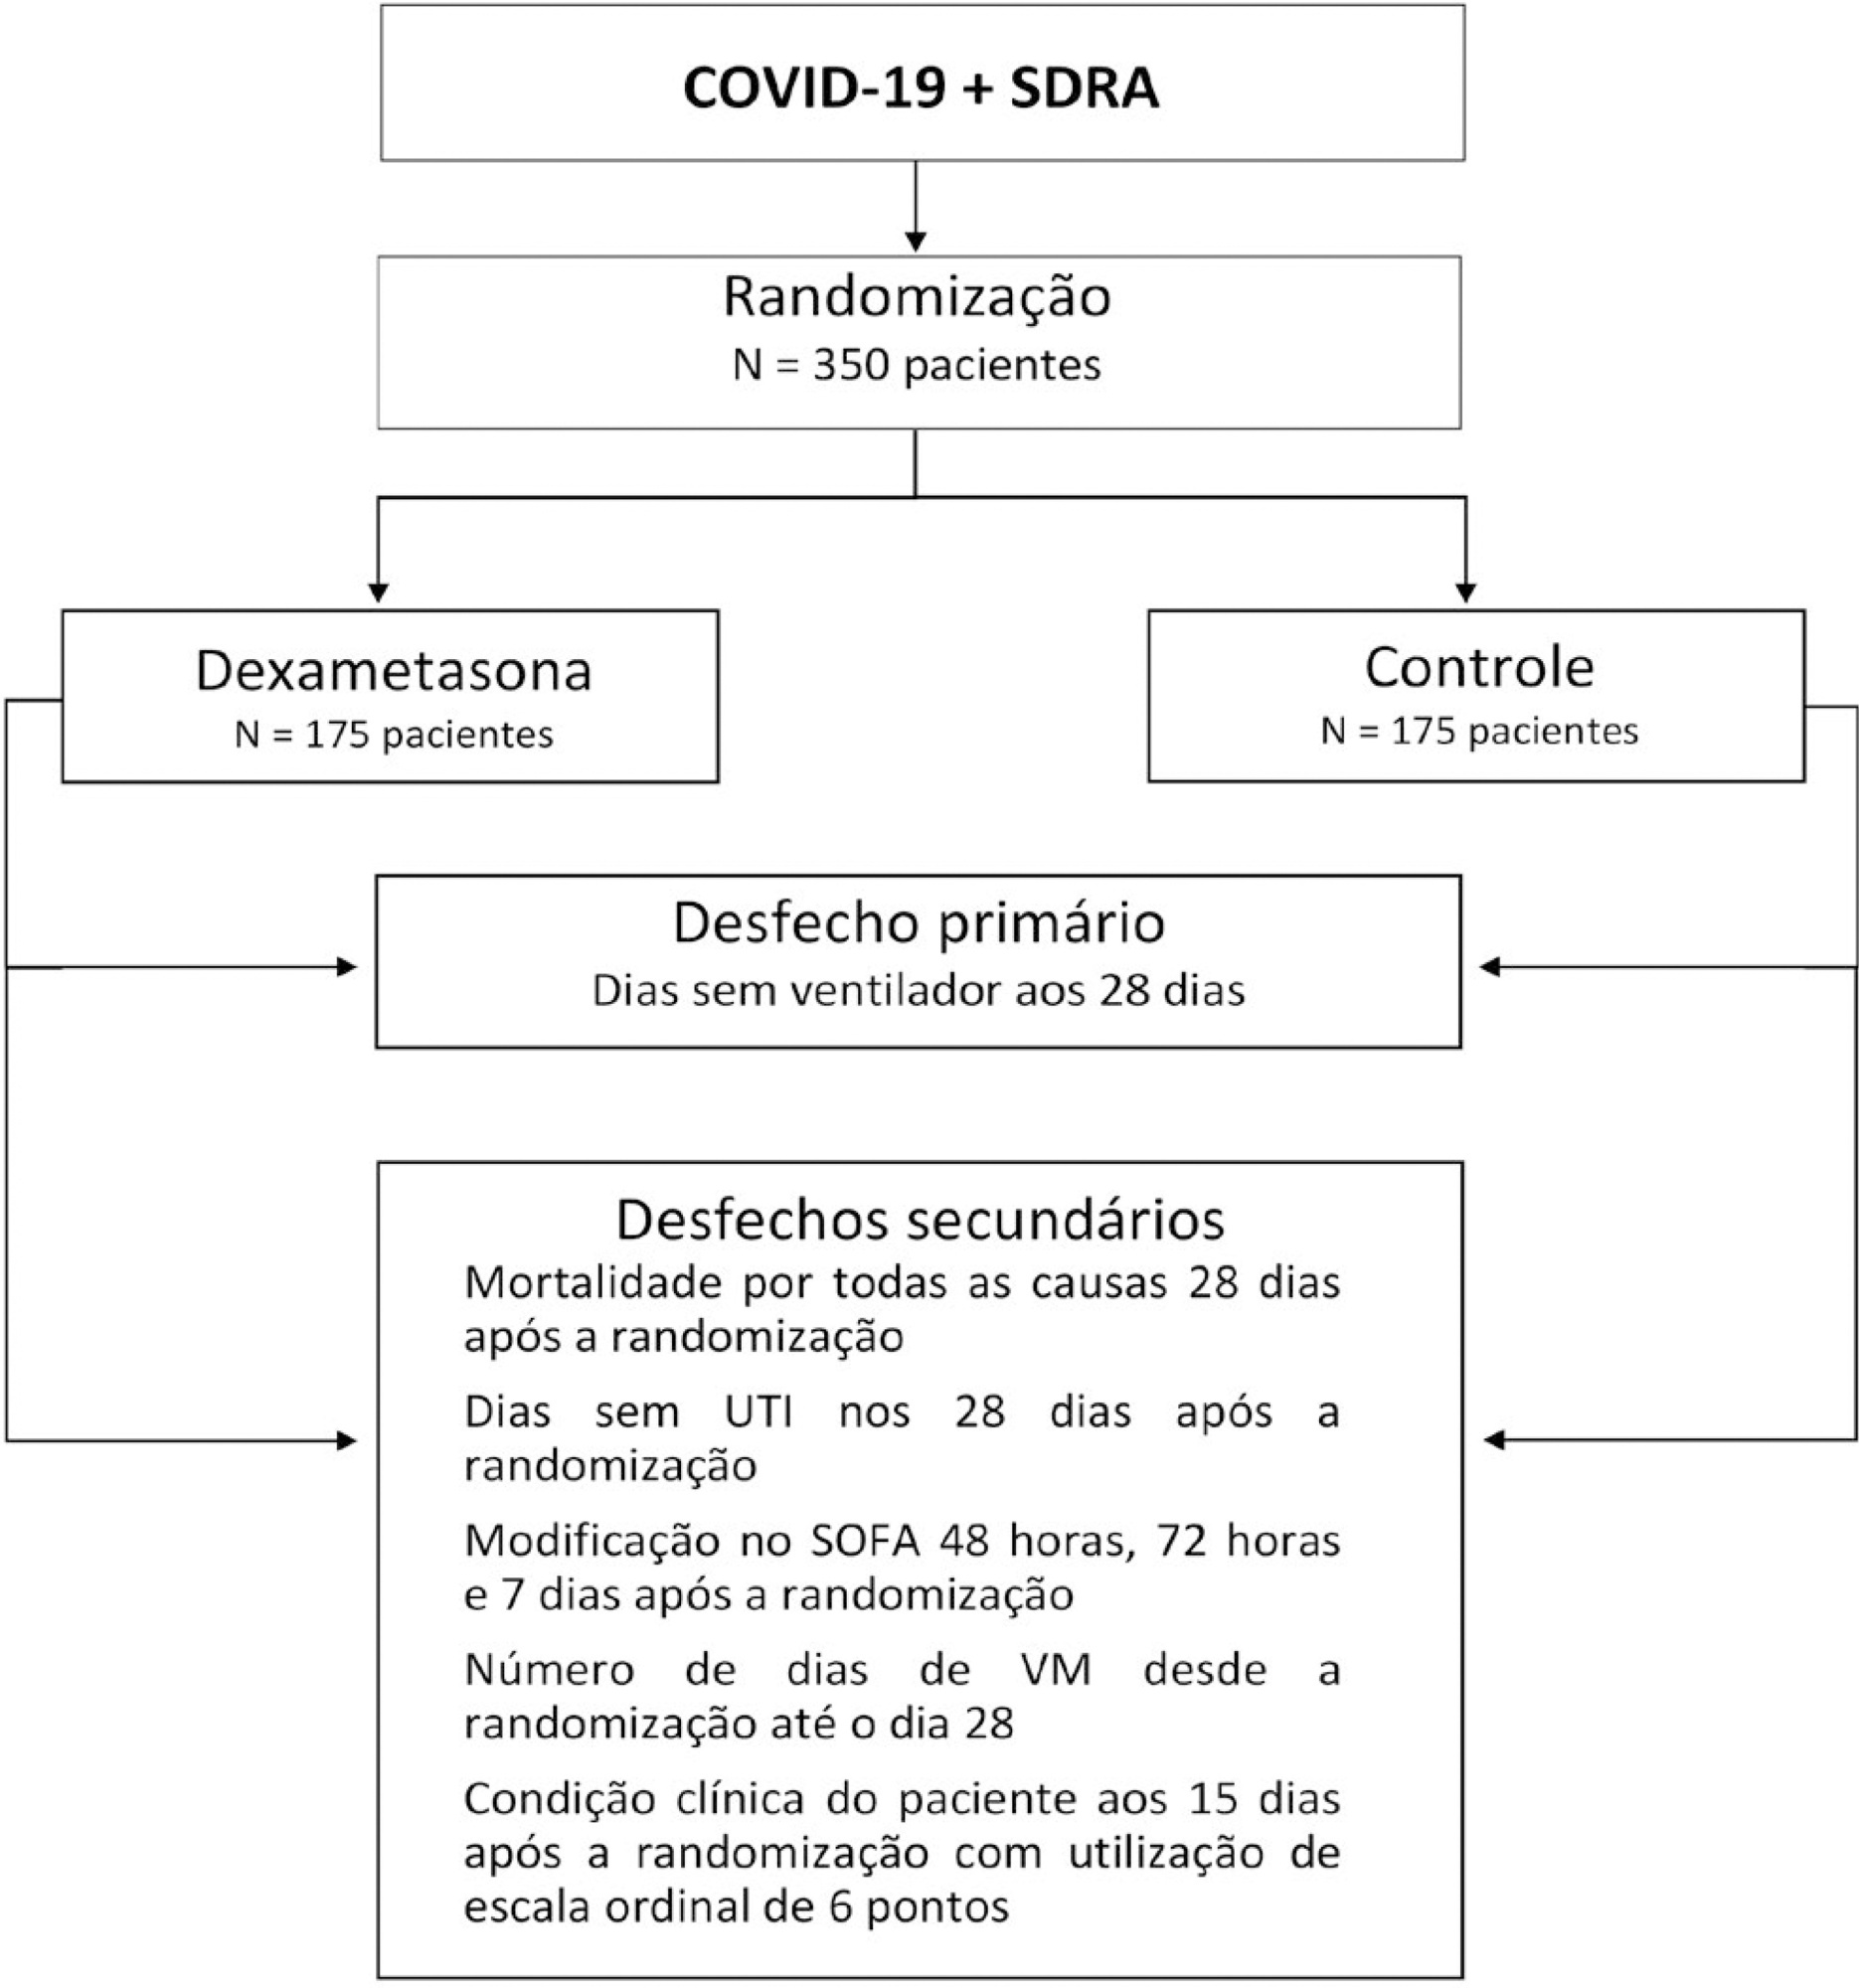 COVID-19-associated ARDS treated with DEXamethasone (CoDEX): study design and rationale for a randomized trial